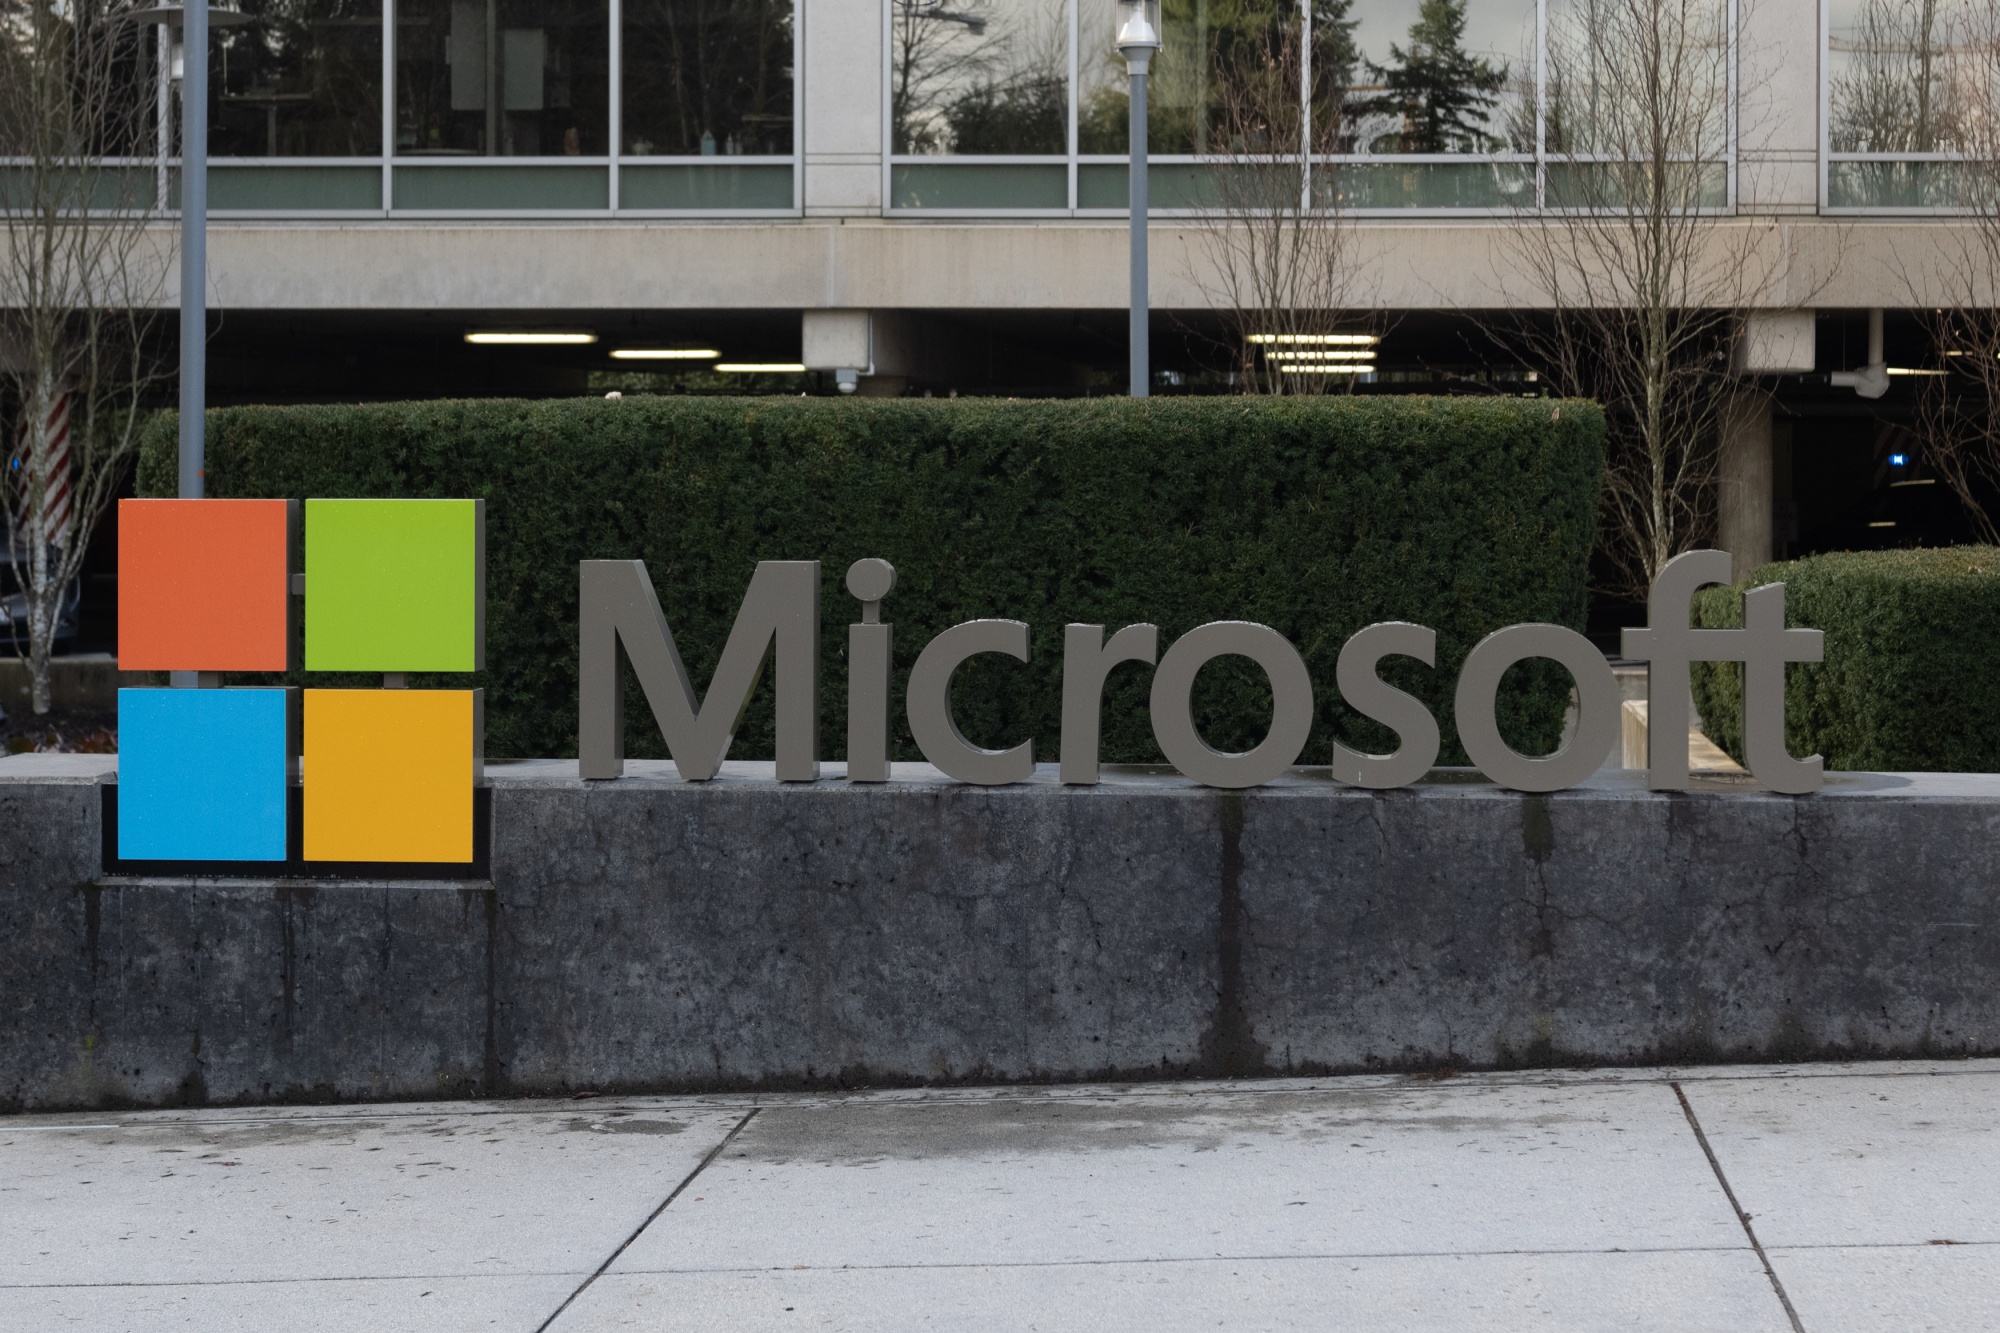 Microsoft faces regulatory opposition to its $69 billion takeover of Activision, a deal that was announced a year ago.